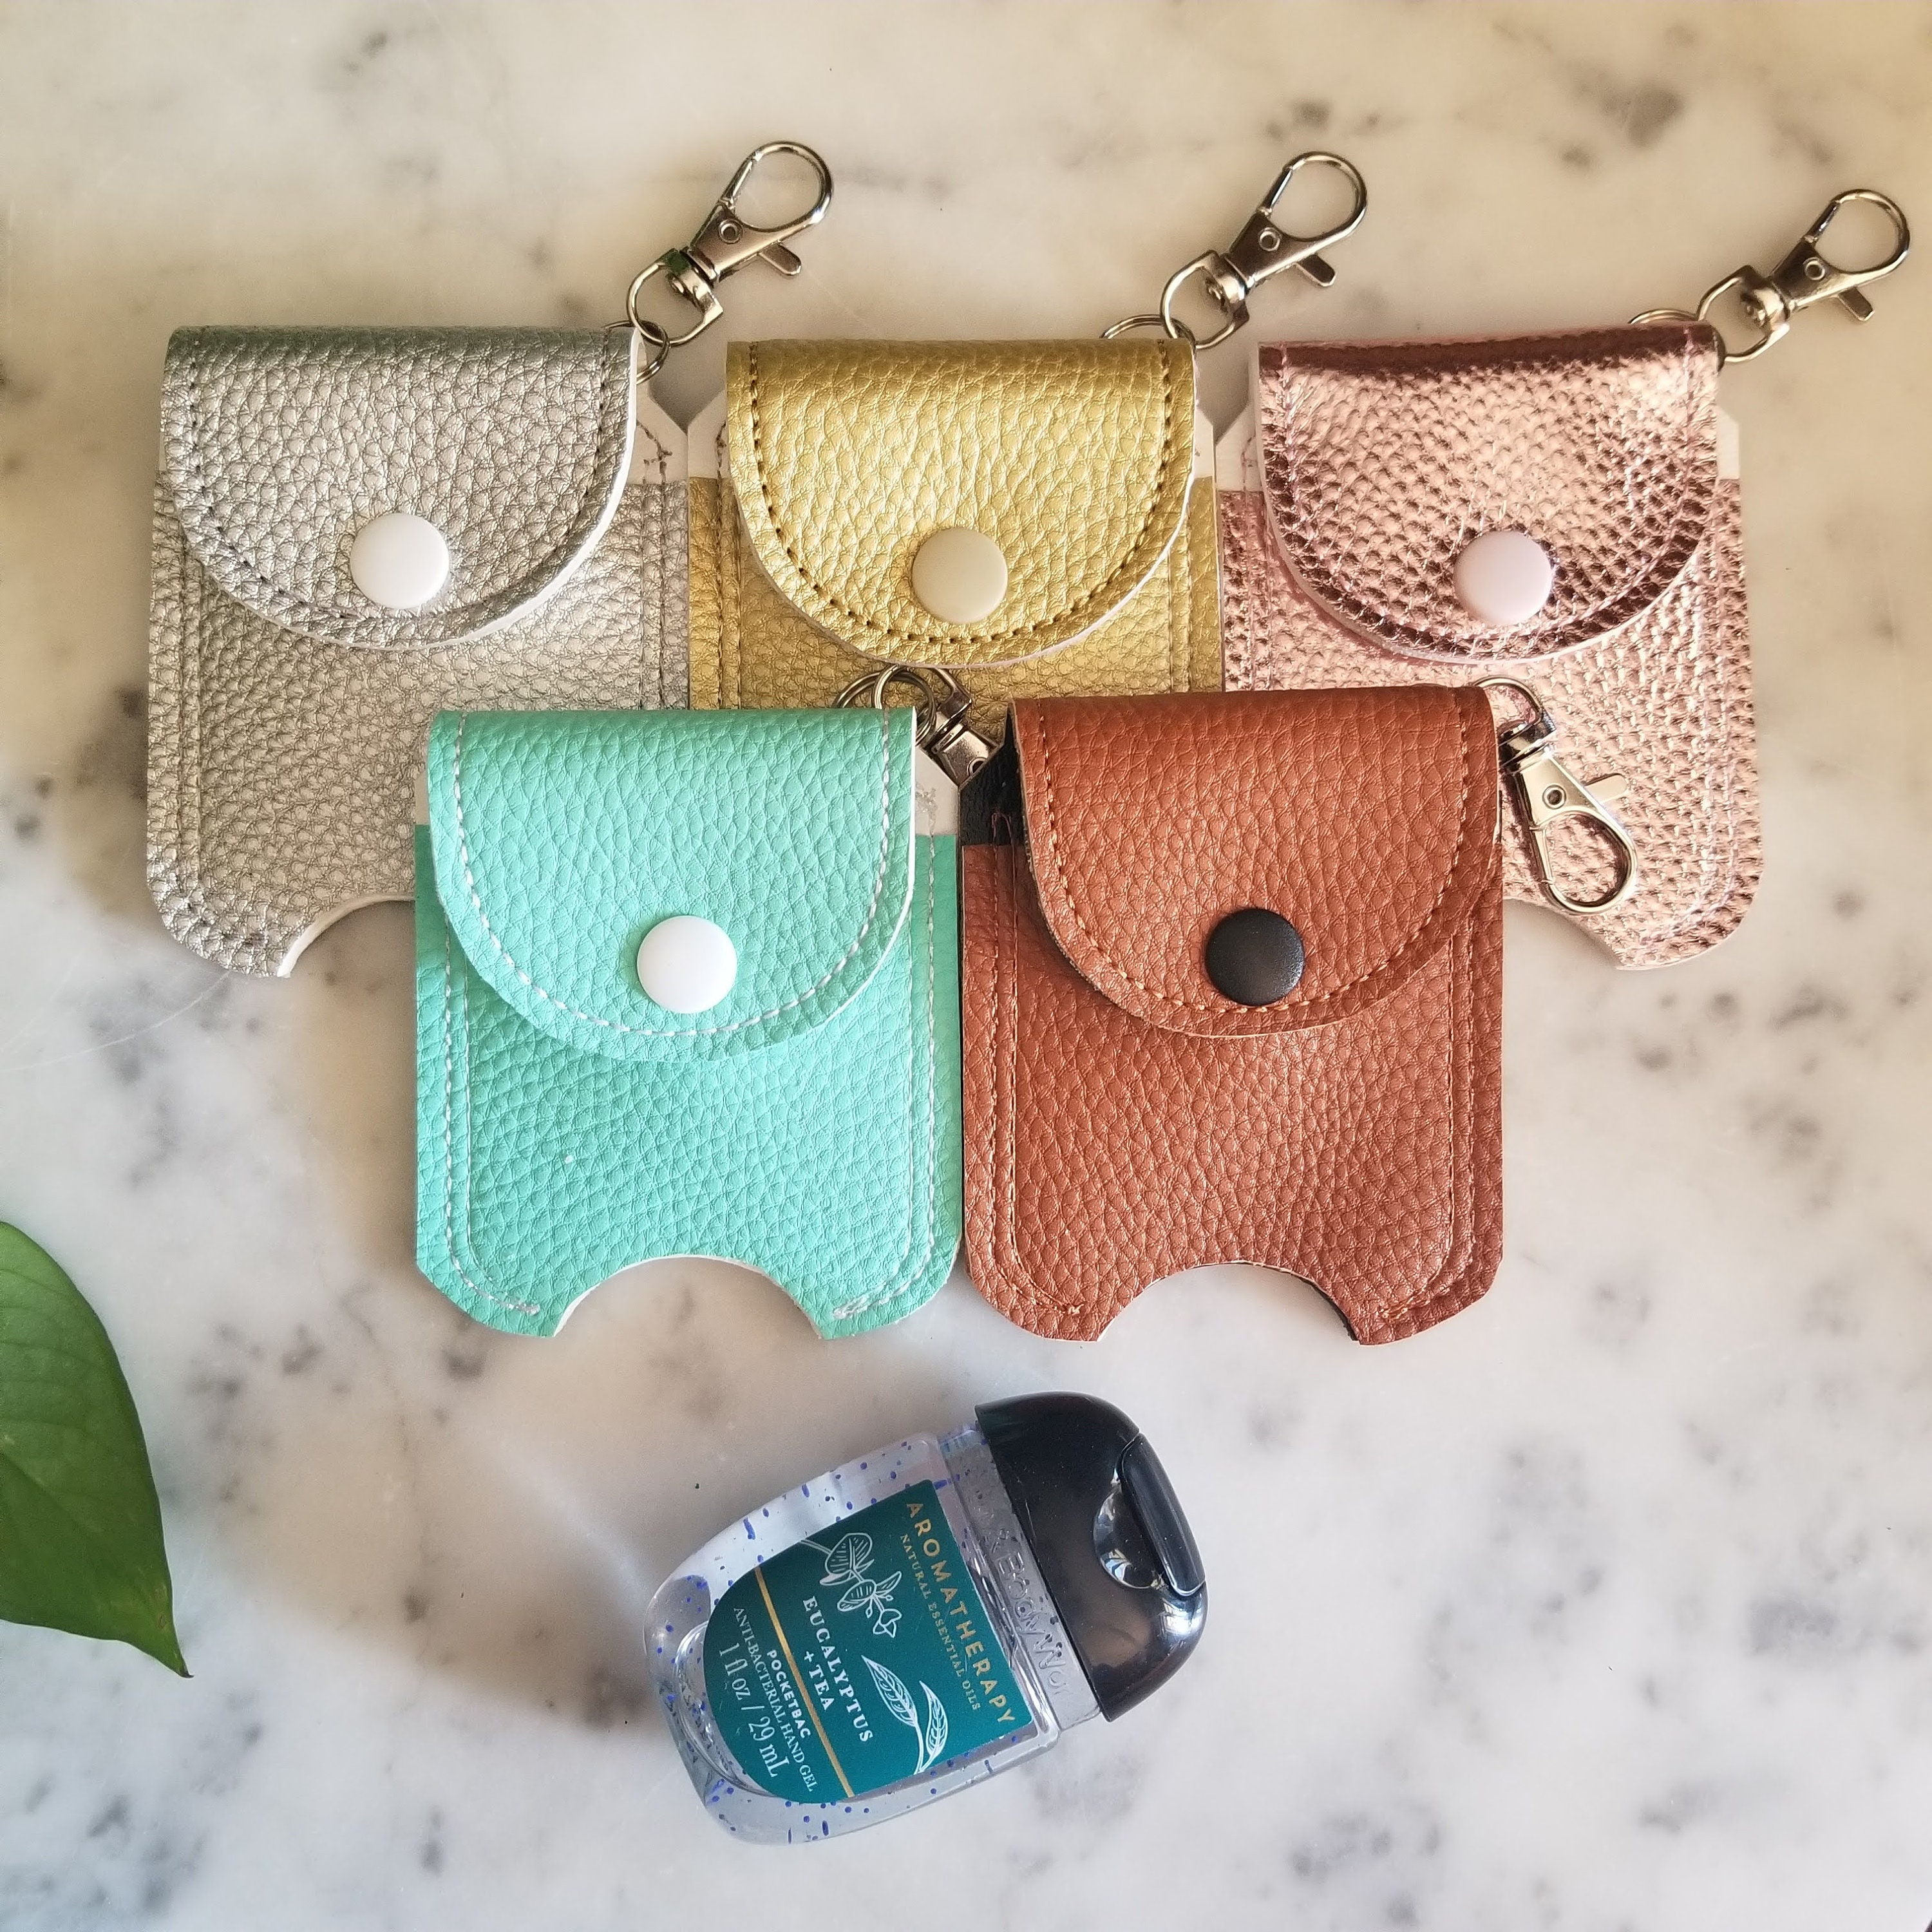 Bath & Body Works hand Sanitizer holders. Both SPARKLE! | Purses and bags,  Tote bag purse, Bath and body works